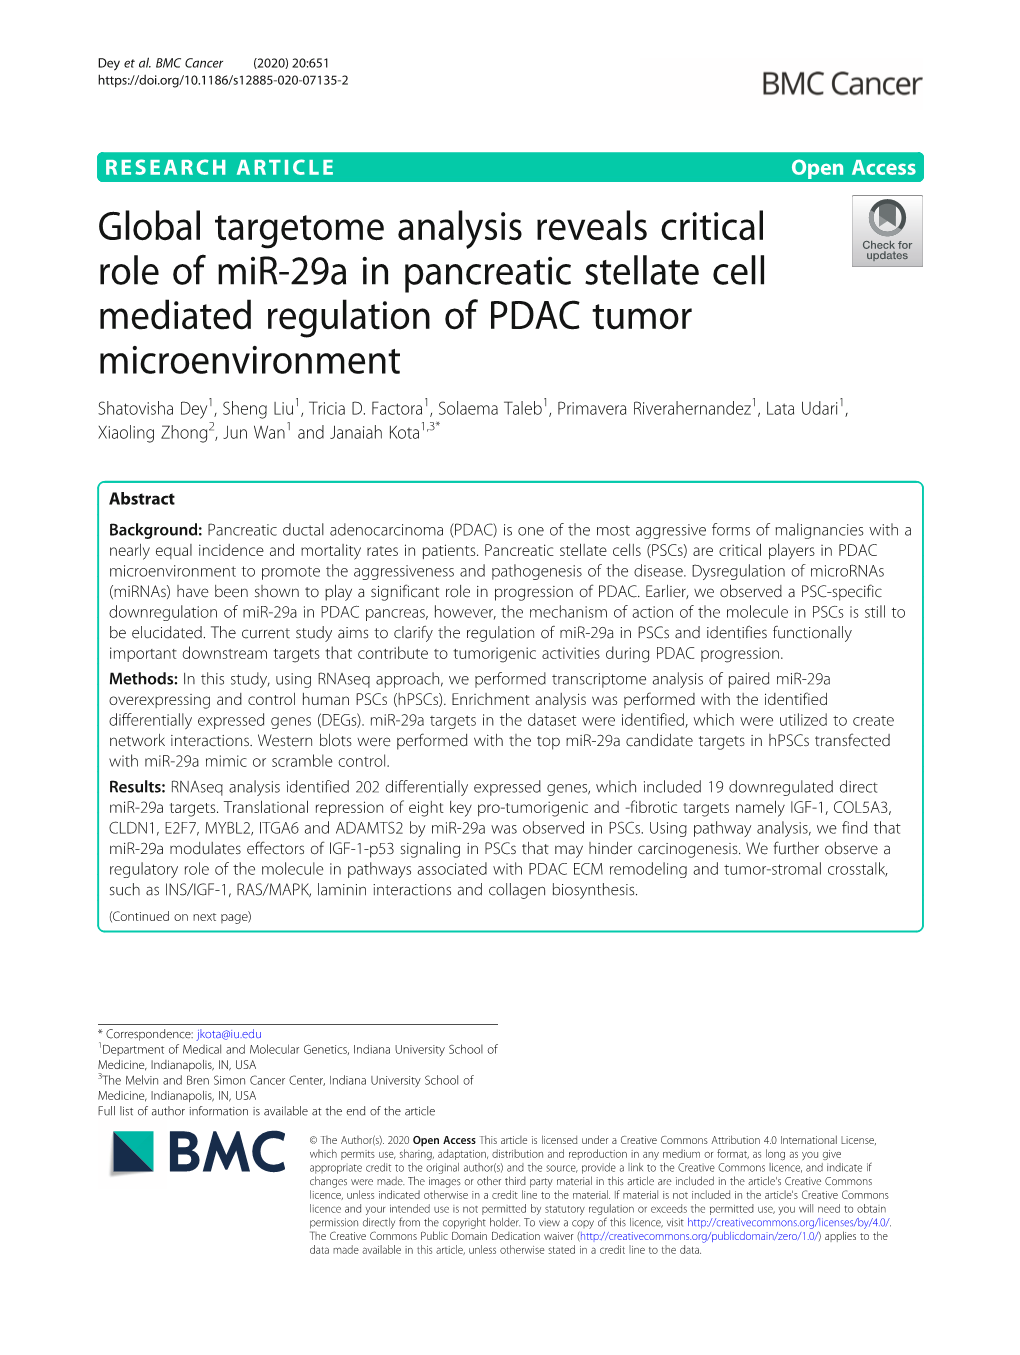 Global Targetome Analysis Reveals Critical Role of Mir-29A in Pancreatic Stellate Cell Mediated Regulation of PDAC Tumor Microen